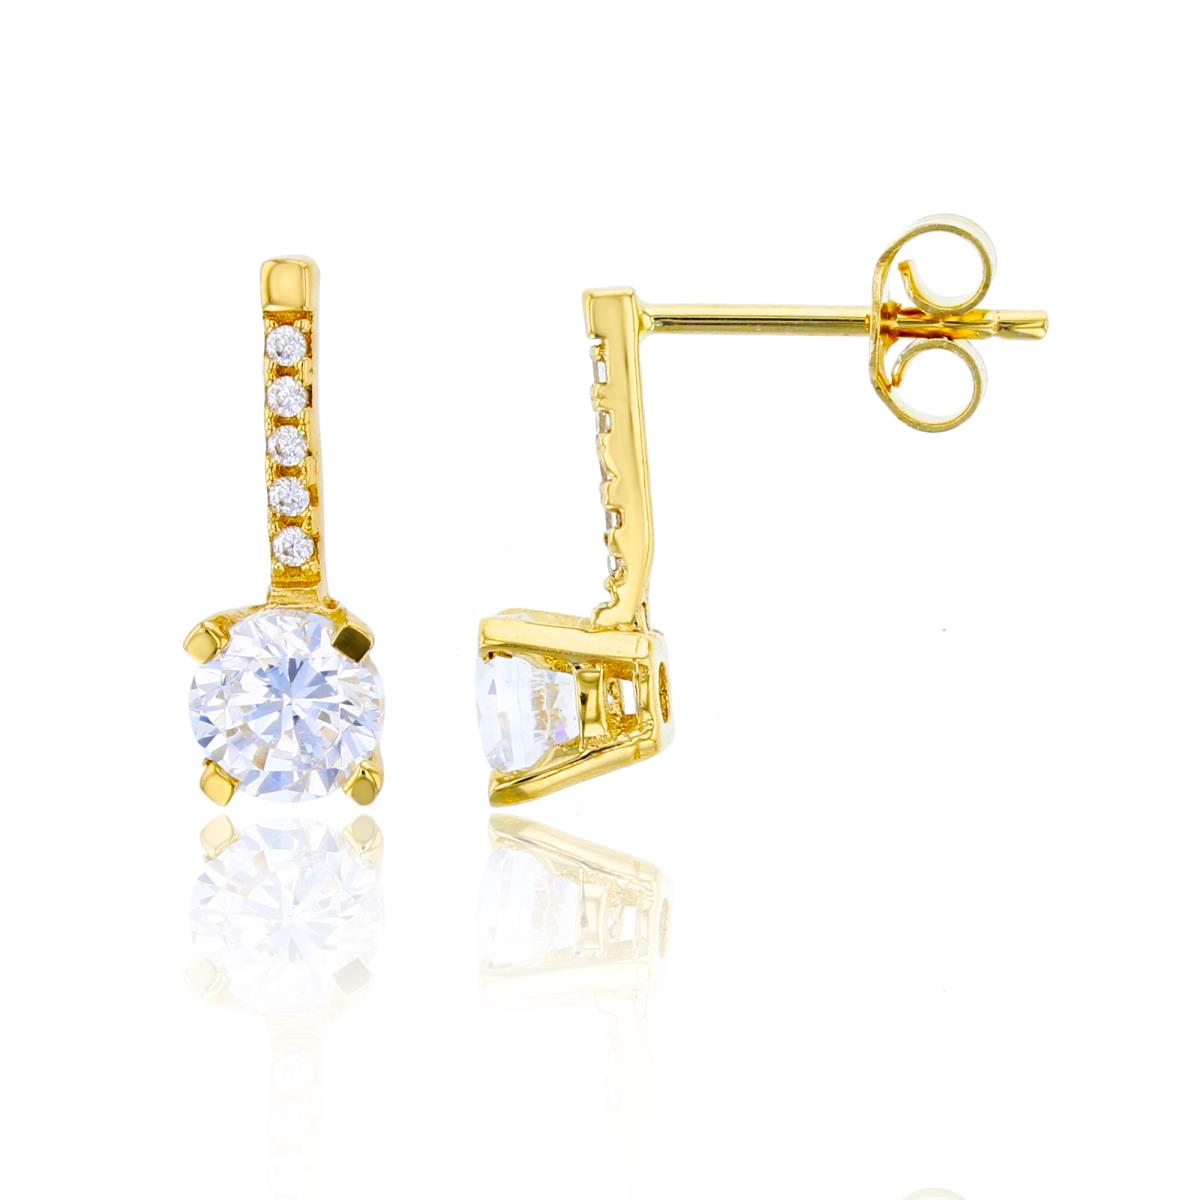 14K Yellow Gold 5.25mm Rnd CZ Solitaire Earring